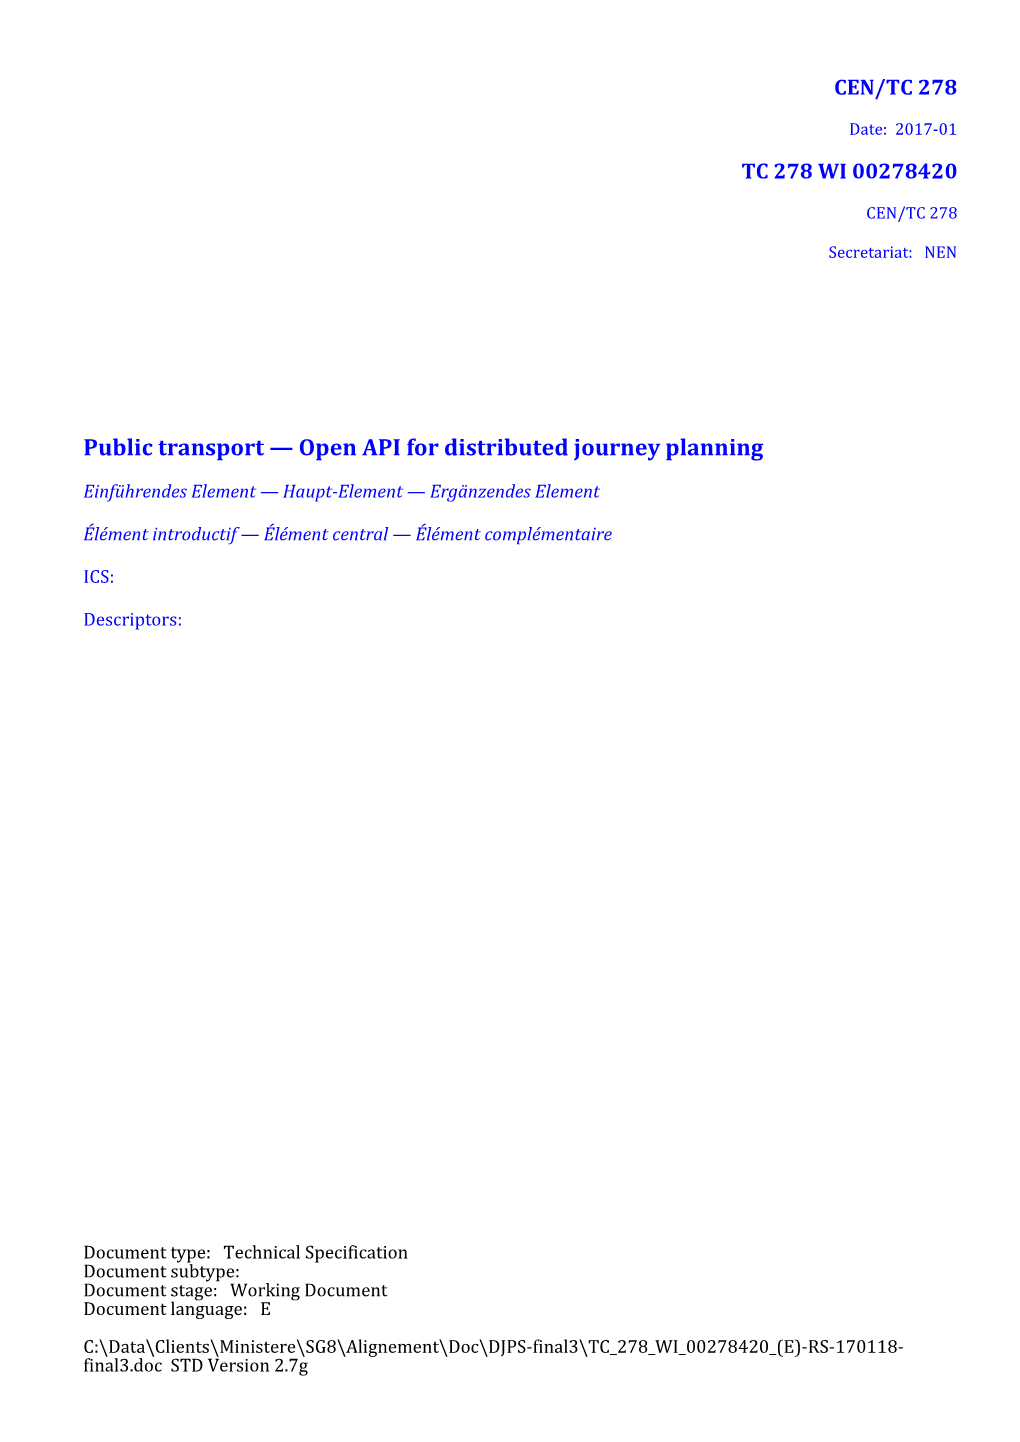 Public Transport — Open API for Distributed Journey Planning